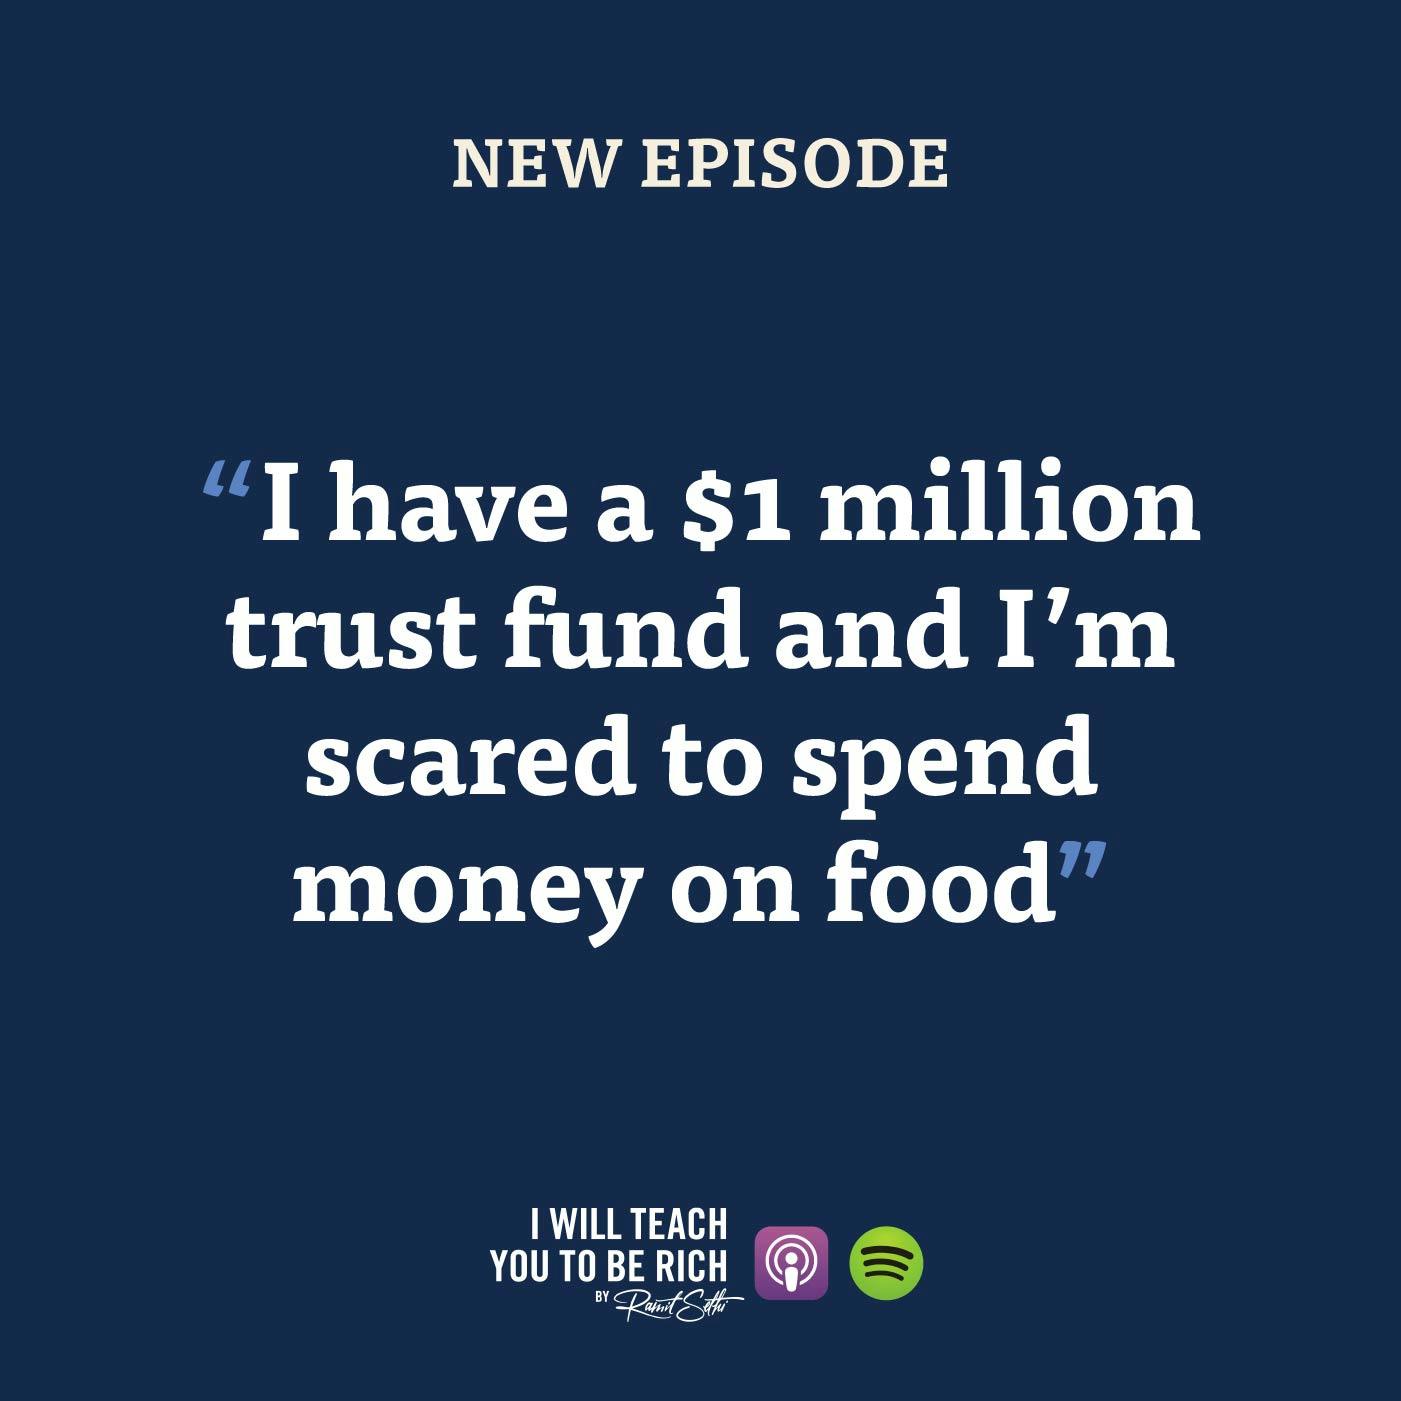 15. “I have a $1 million trust fund and I’m scared to spend money on food”